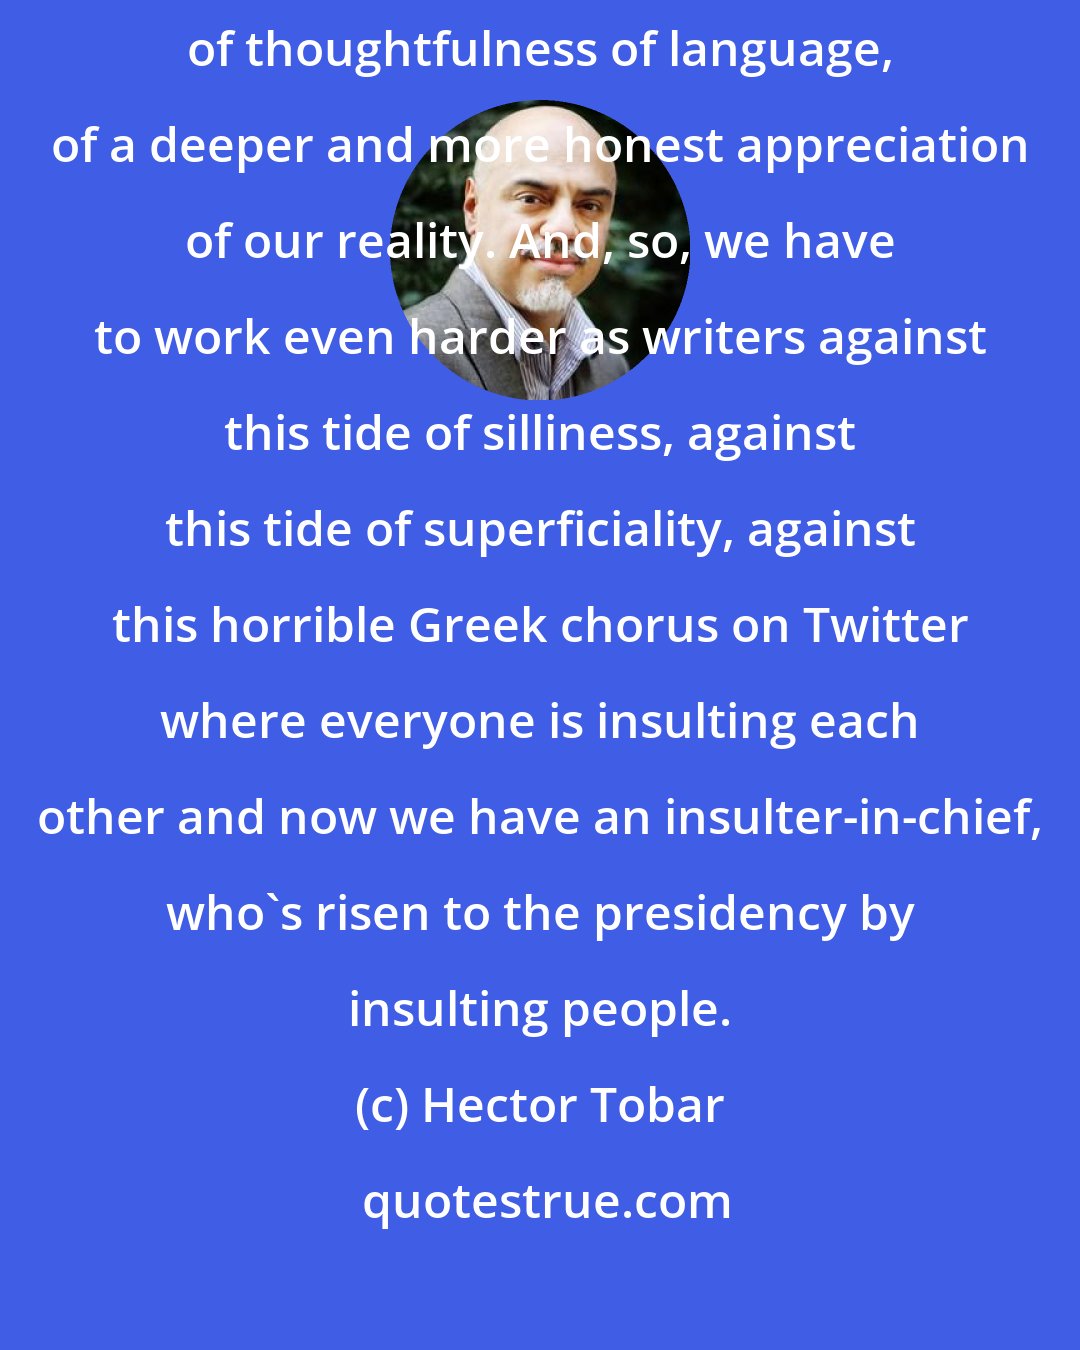 Hector Tobar: What we're trying to do as writers is rescue, preserve this space of thoughtfulness of language, of a deeper and more honest appreciation of our reality. And, so, we have to work even harder as writers against this tide of silliness, against this tide of superficiality, against this horrible Greek chorus on Twitter where everyone is insulting each other and now we have an insulter-in-chief, who's risen to the presidency by insulting people.